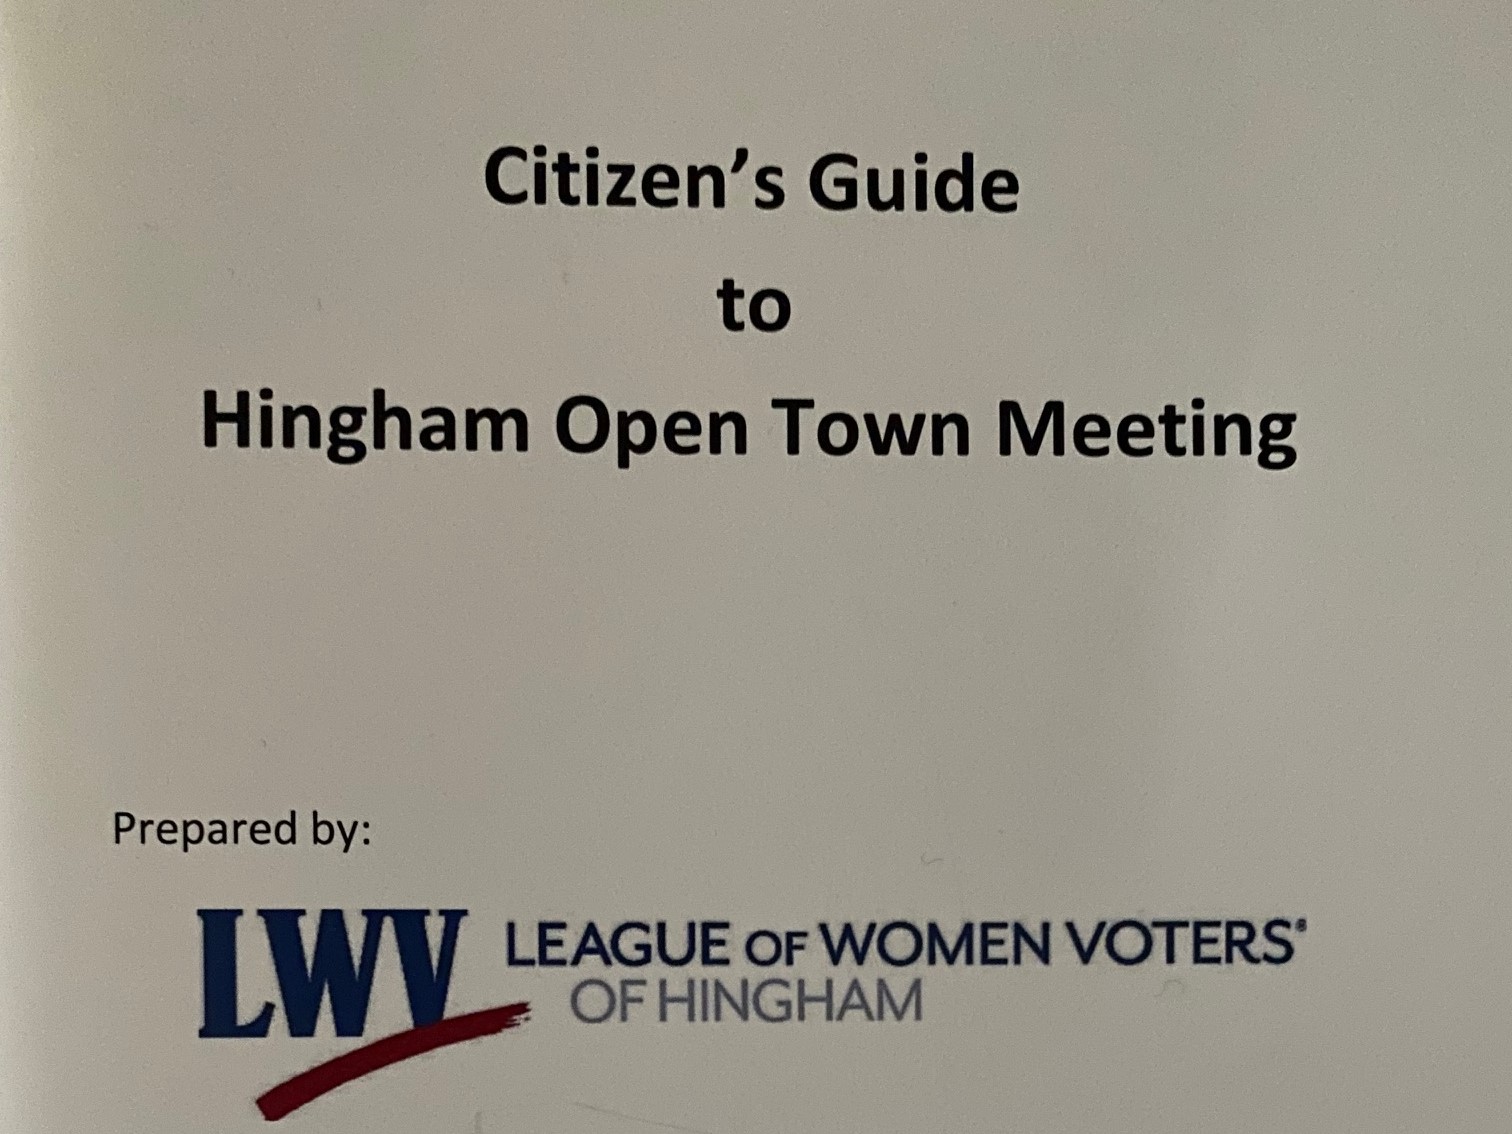 Citizens Guide to Hingham Open Town Meeting